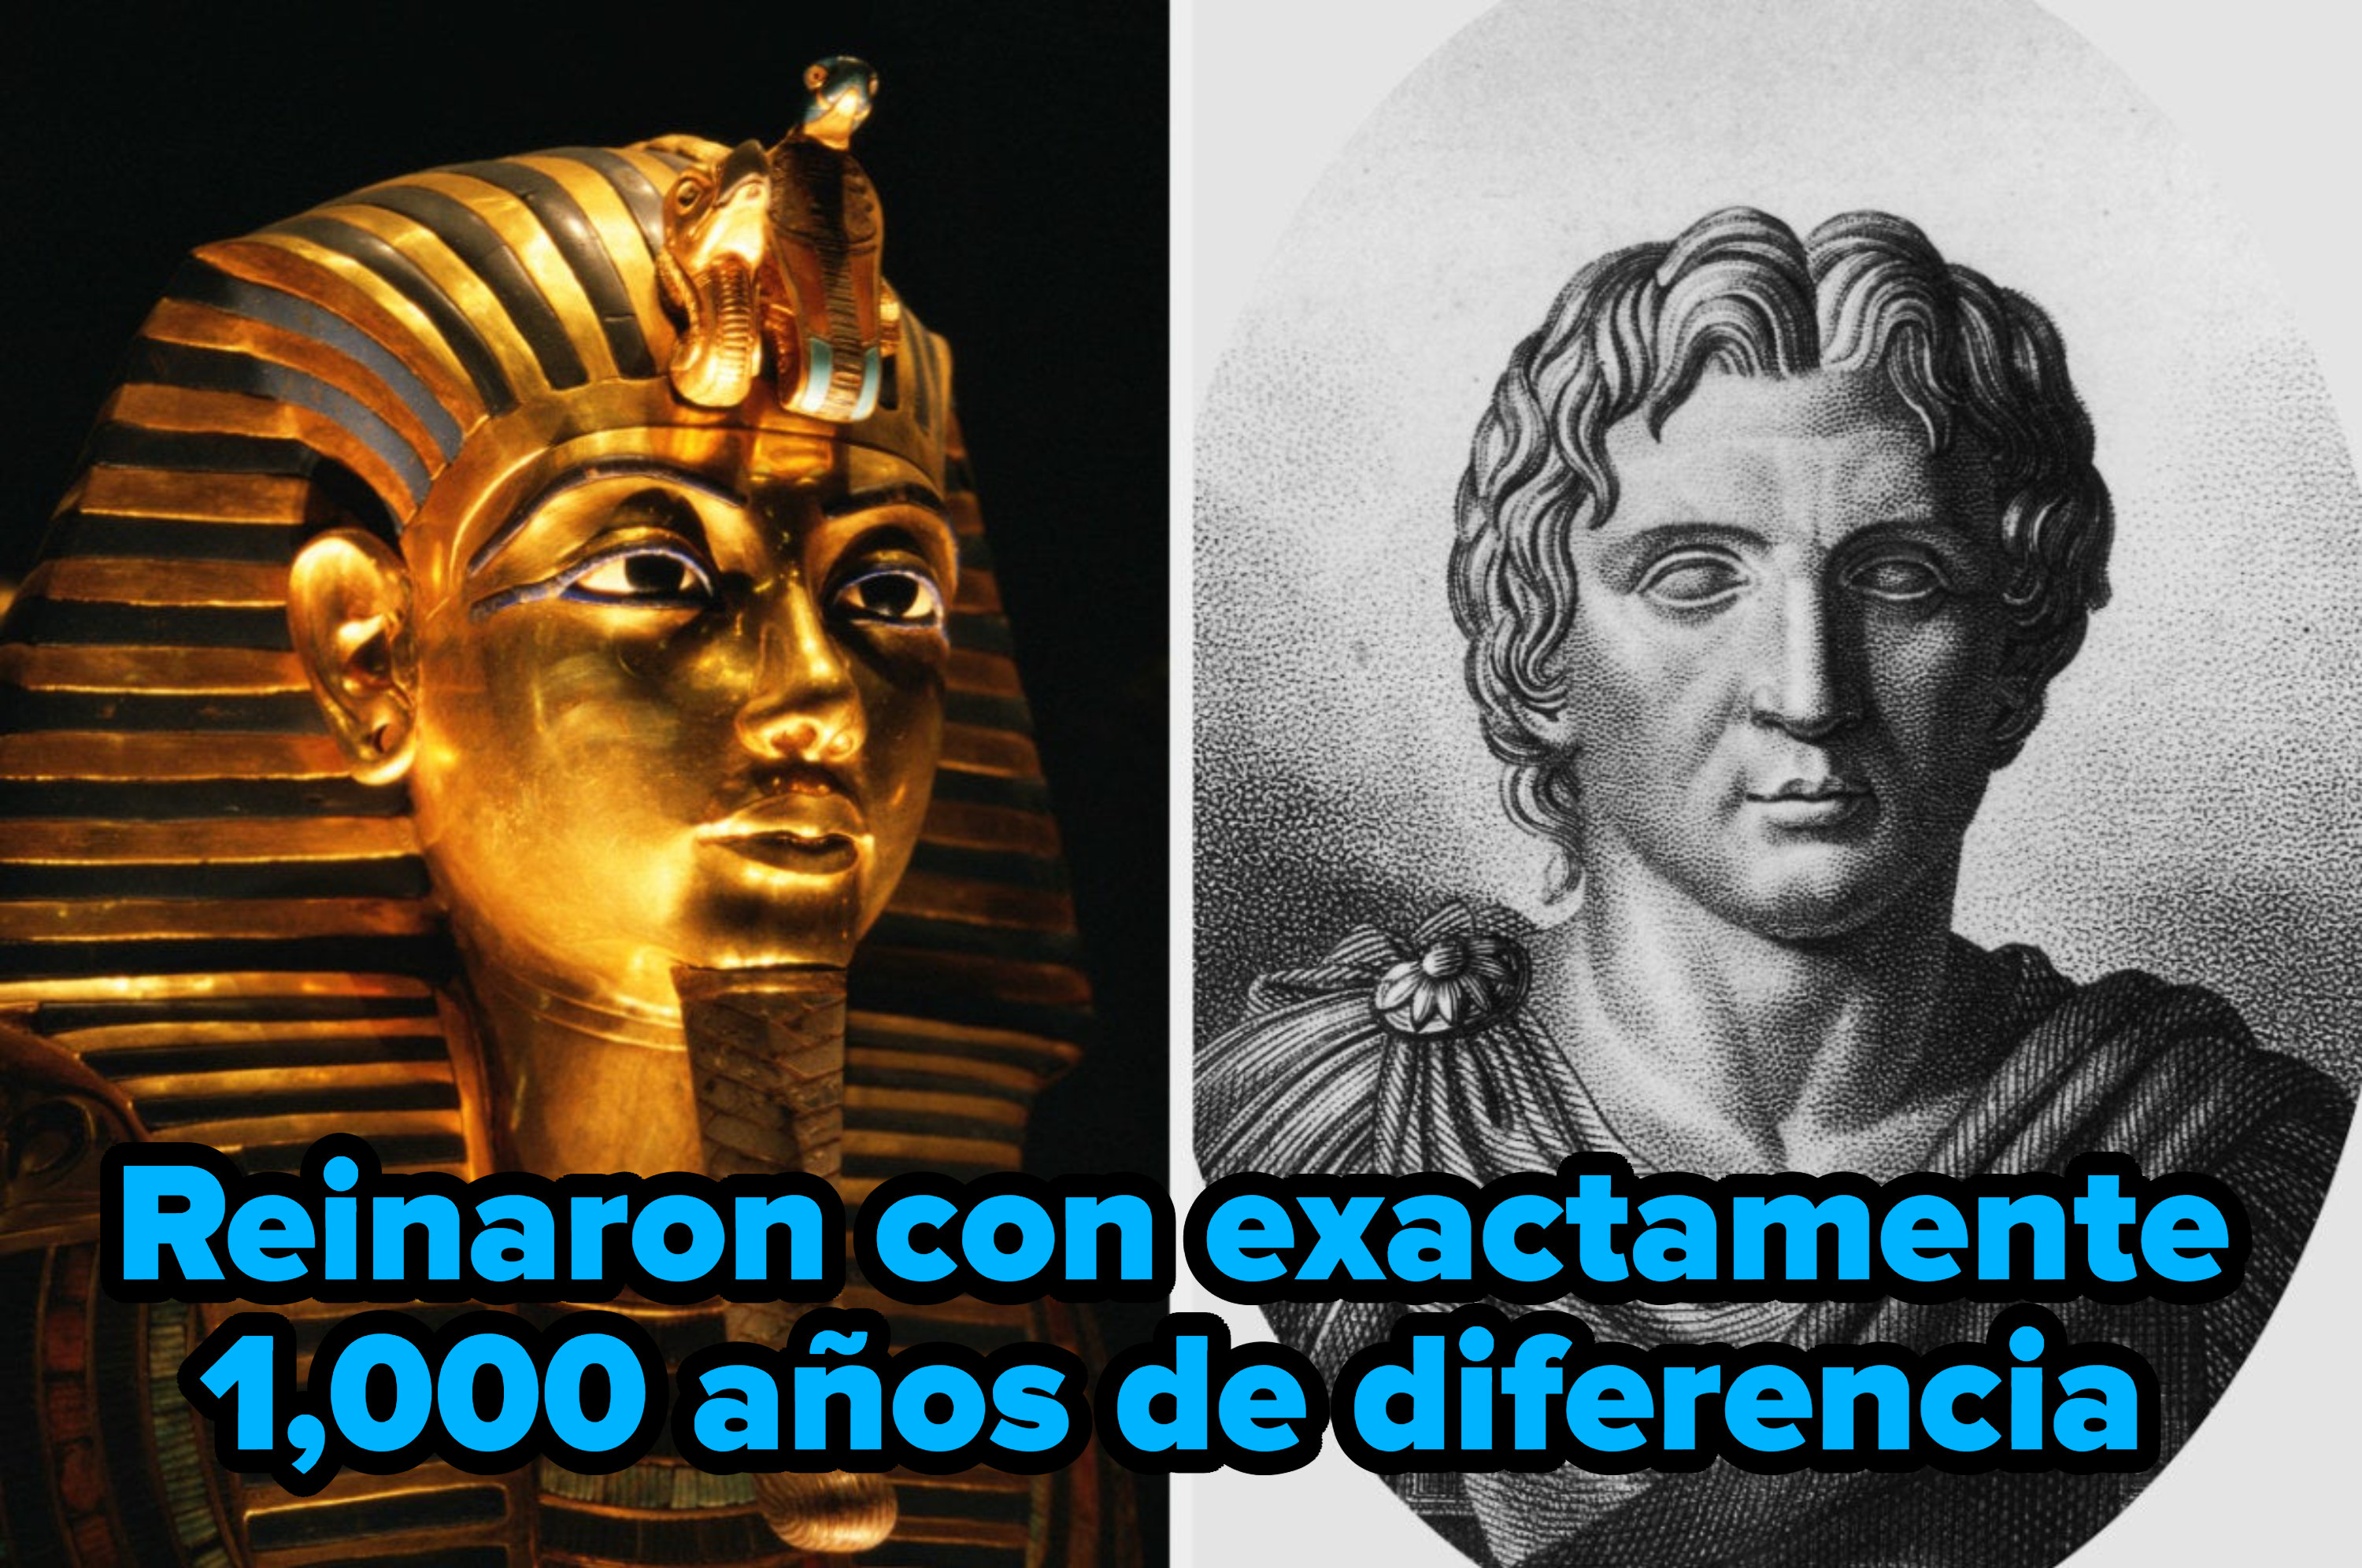 Reigned 1000 years apart written over King Tutankhamun and Alexander the Great